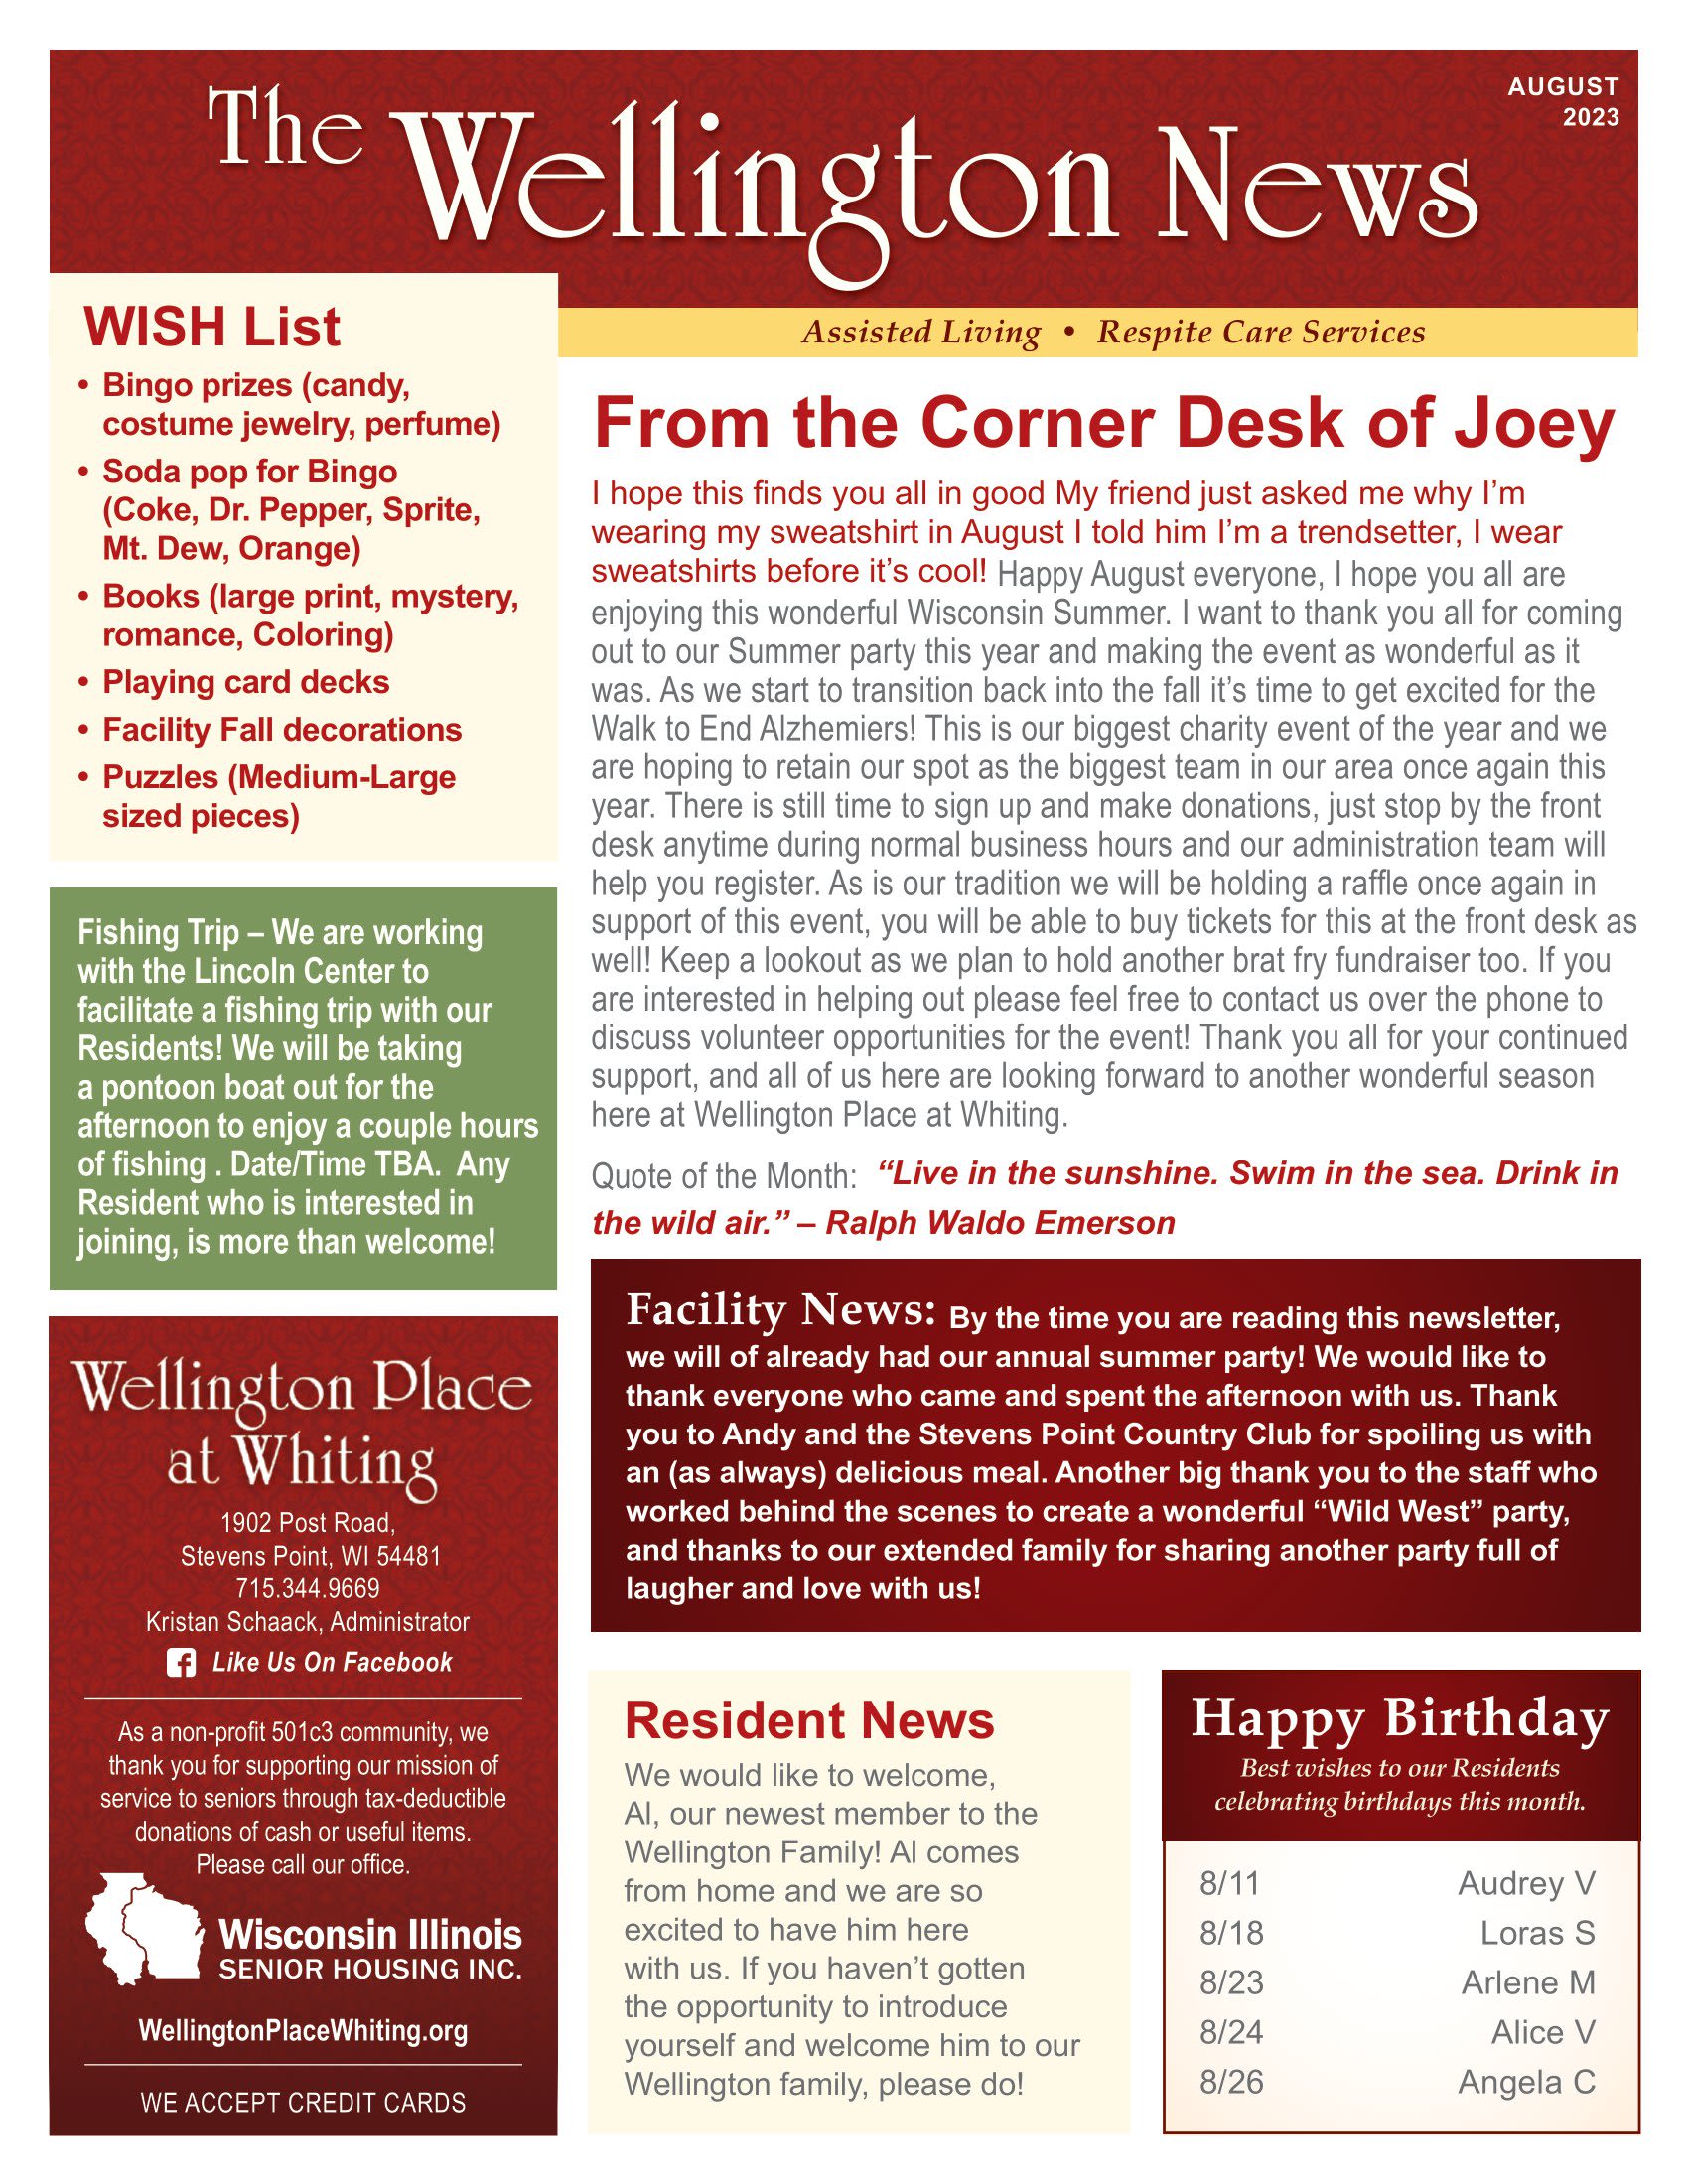 August 2023 newsletter at Wellington Place at Whiting in Stevens Point, Wisconsin